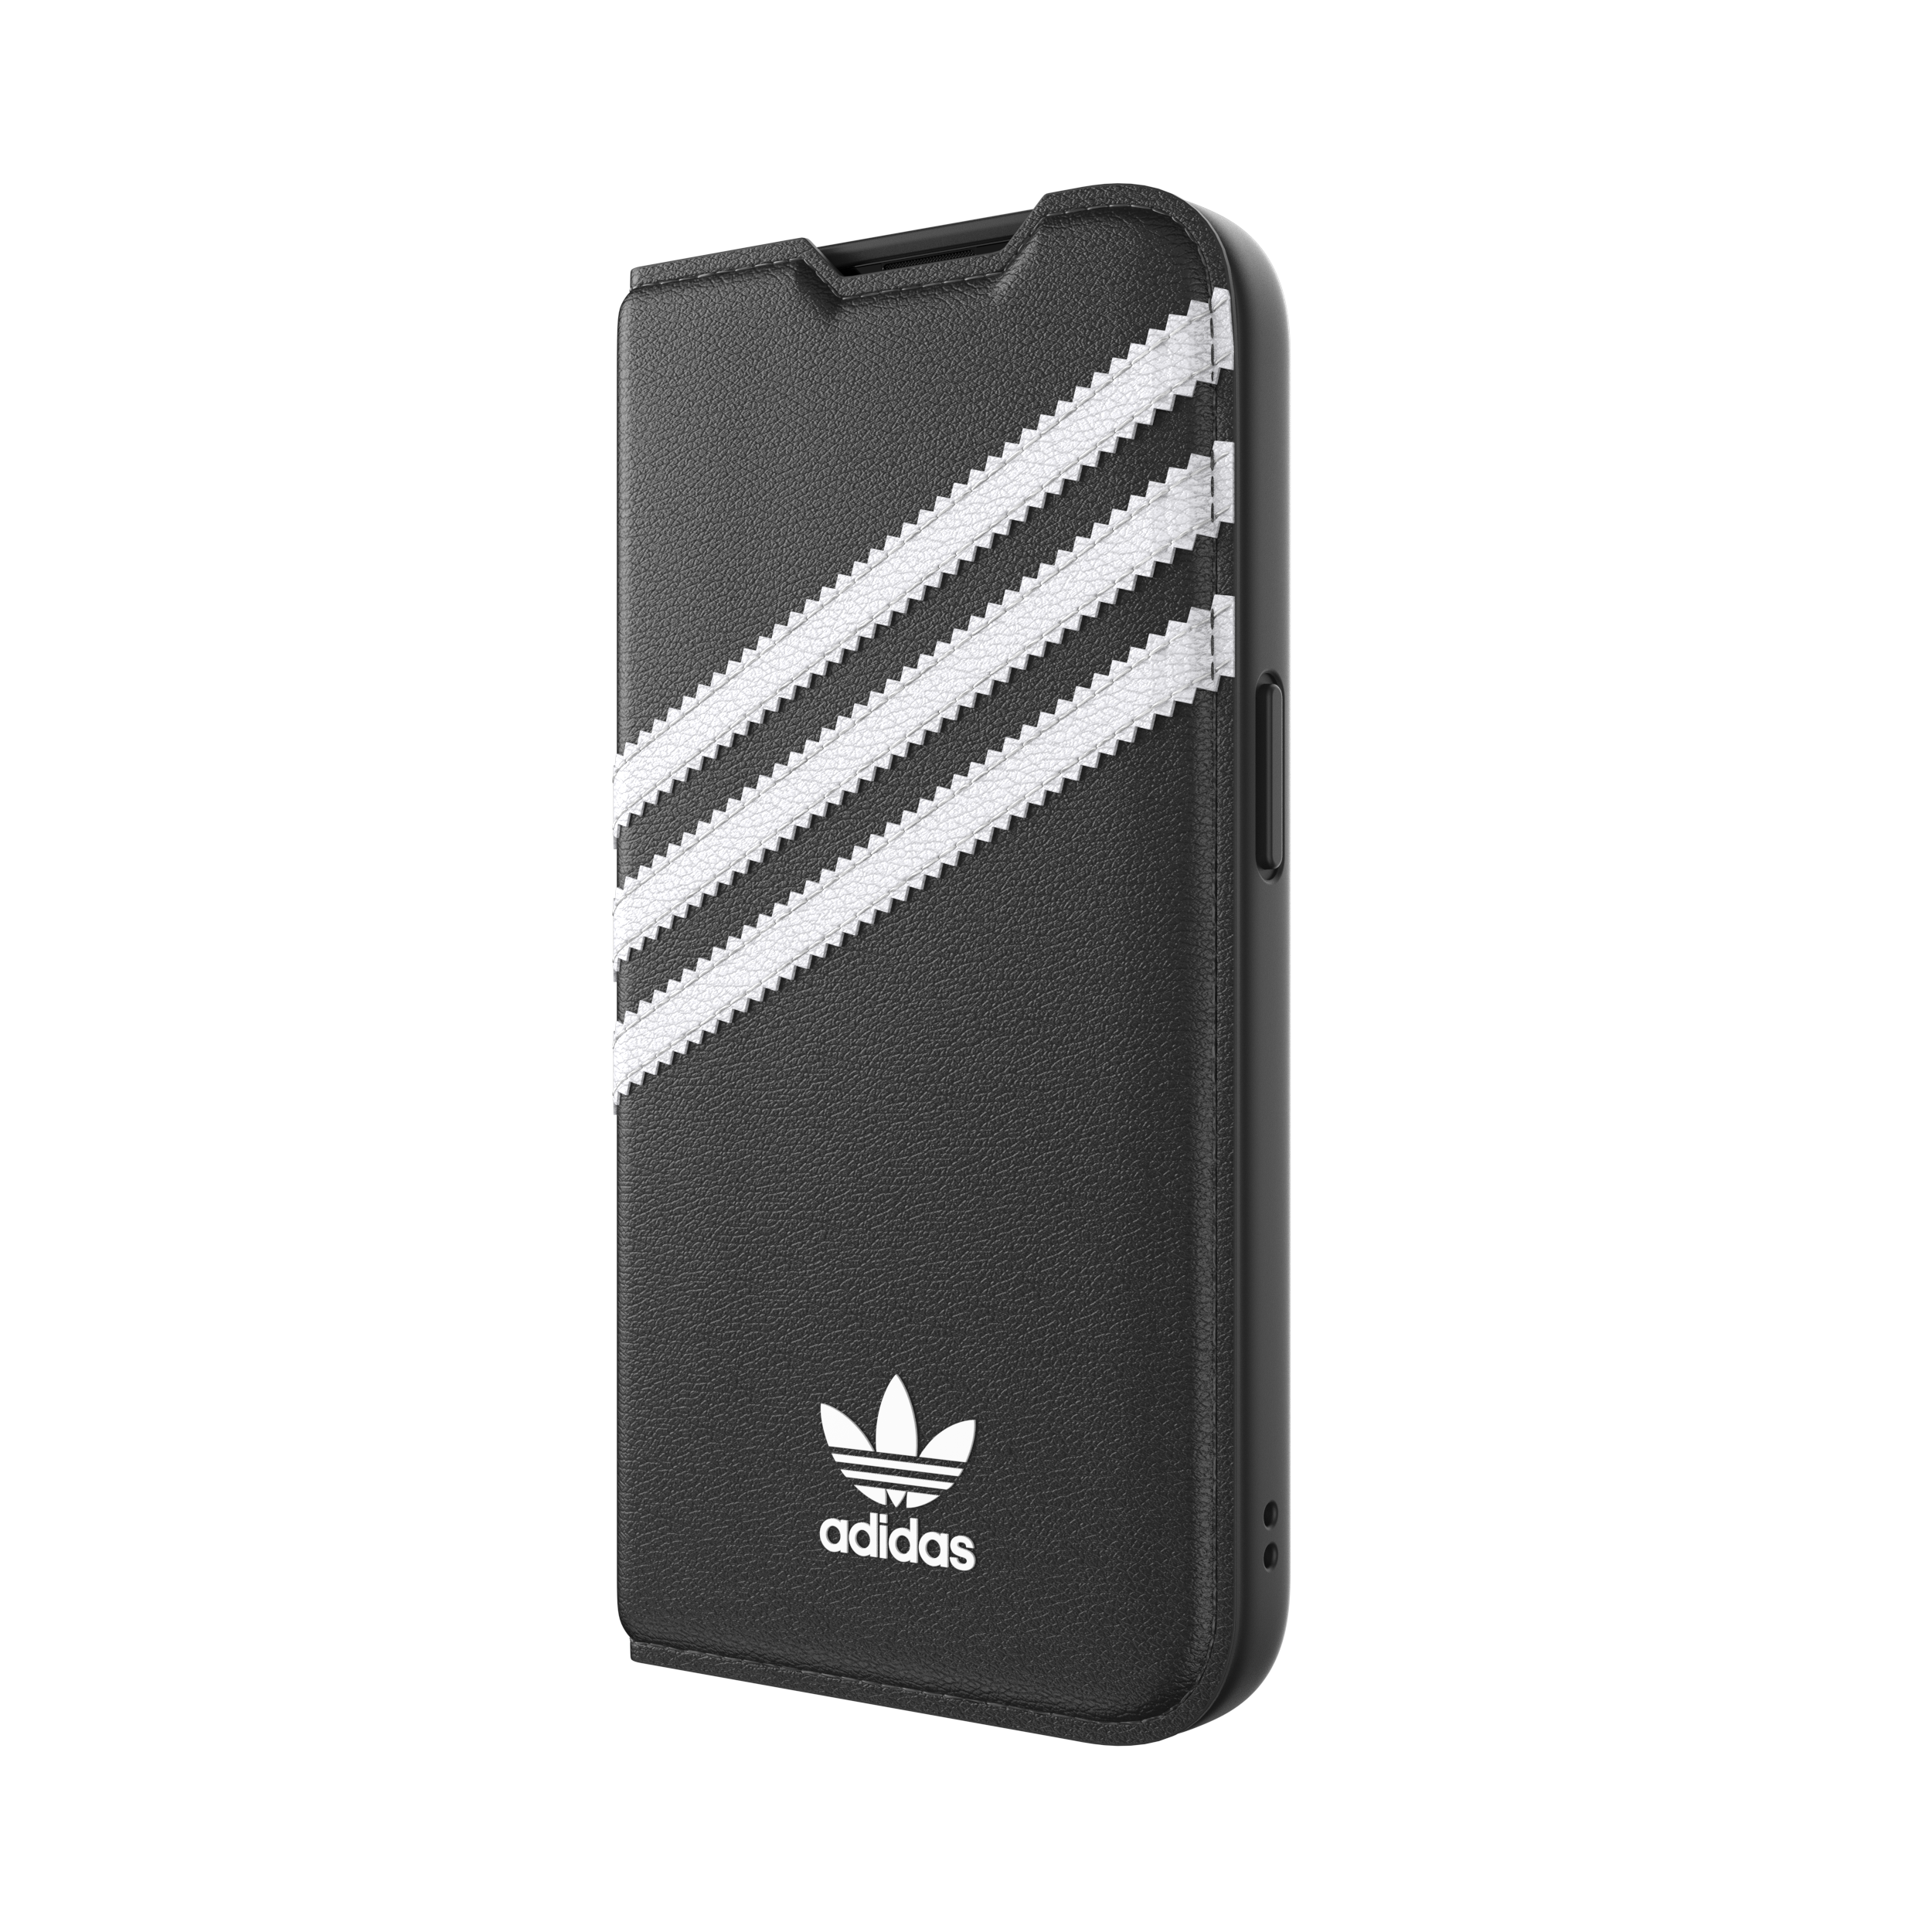 ADIDAS 14 IPHONE Backcover, BLACK PU, APPLE, PRO, Case Booklet